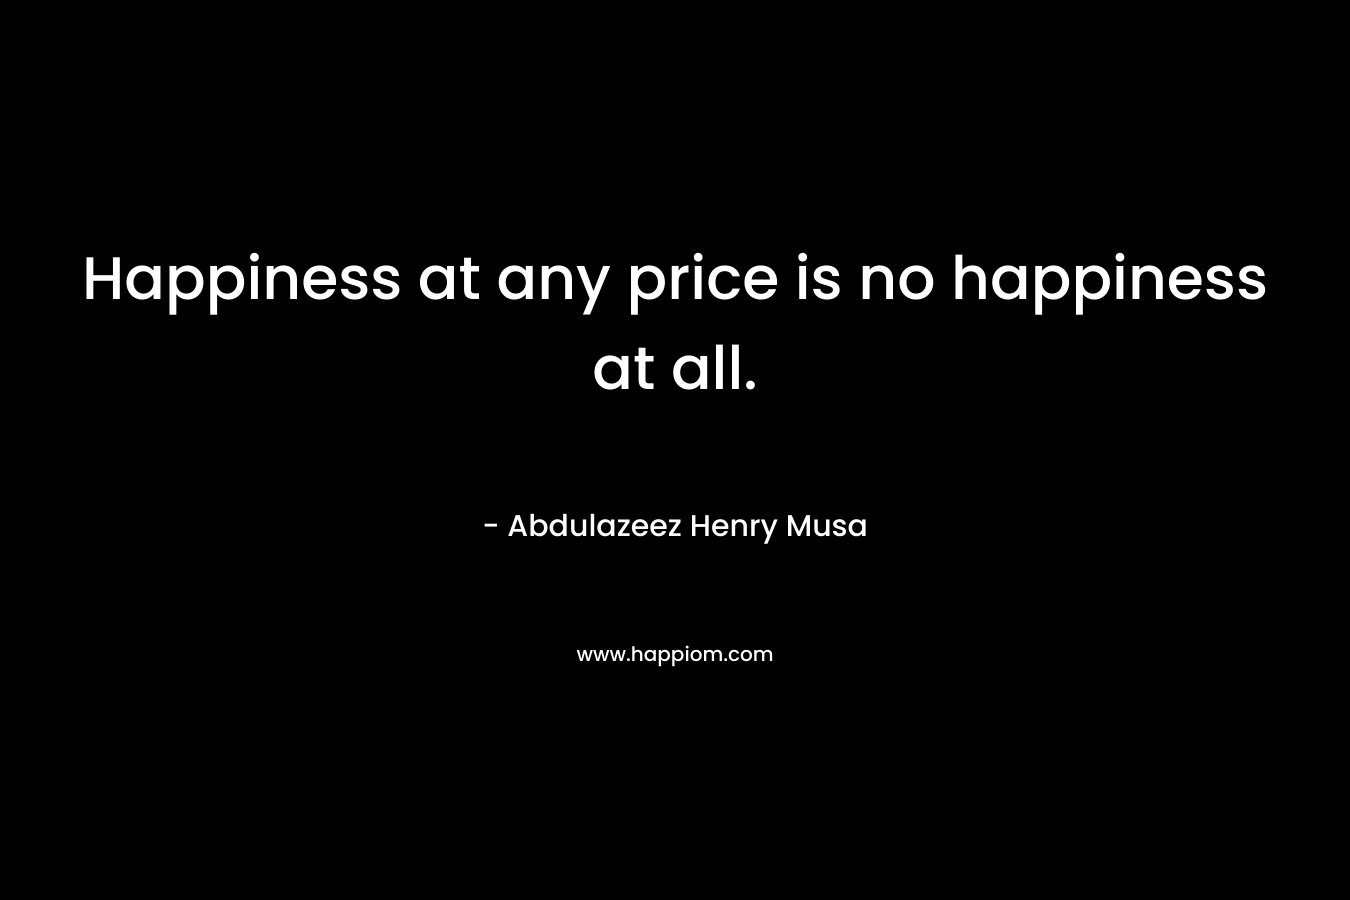 Happiness at any price is no happiness at all.